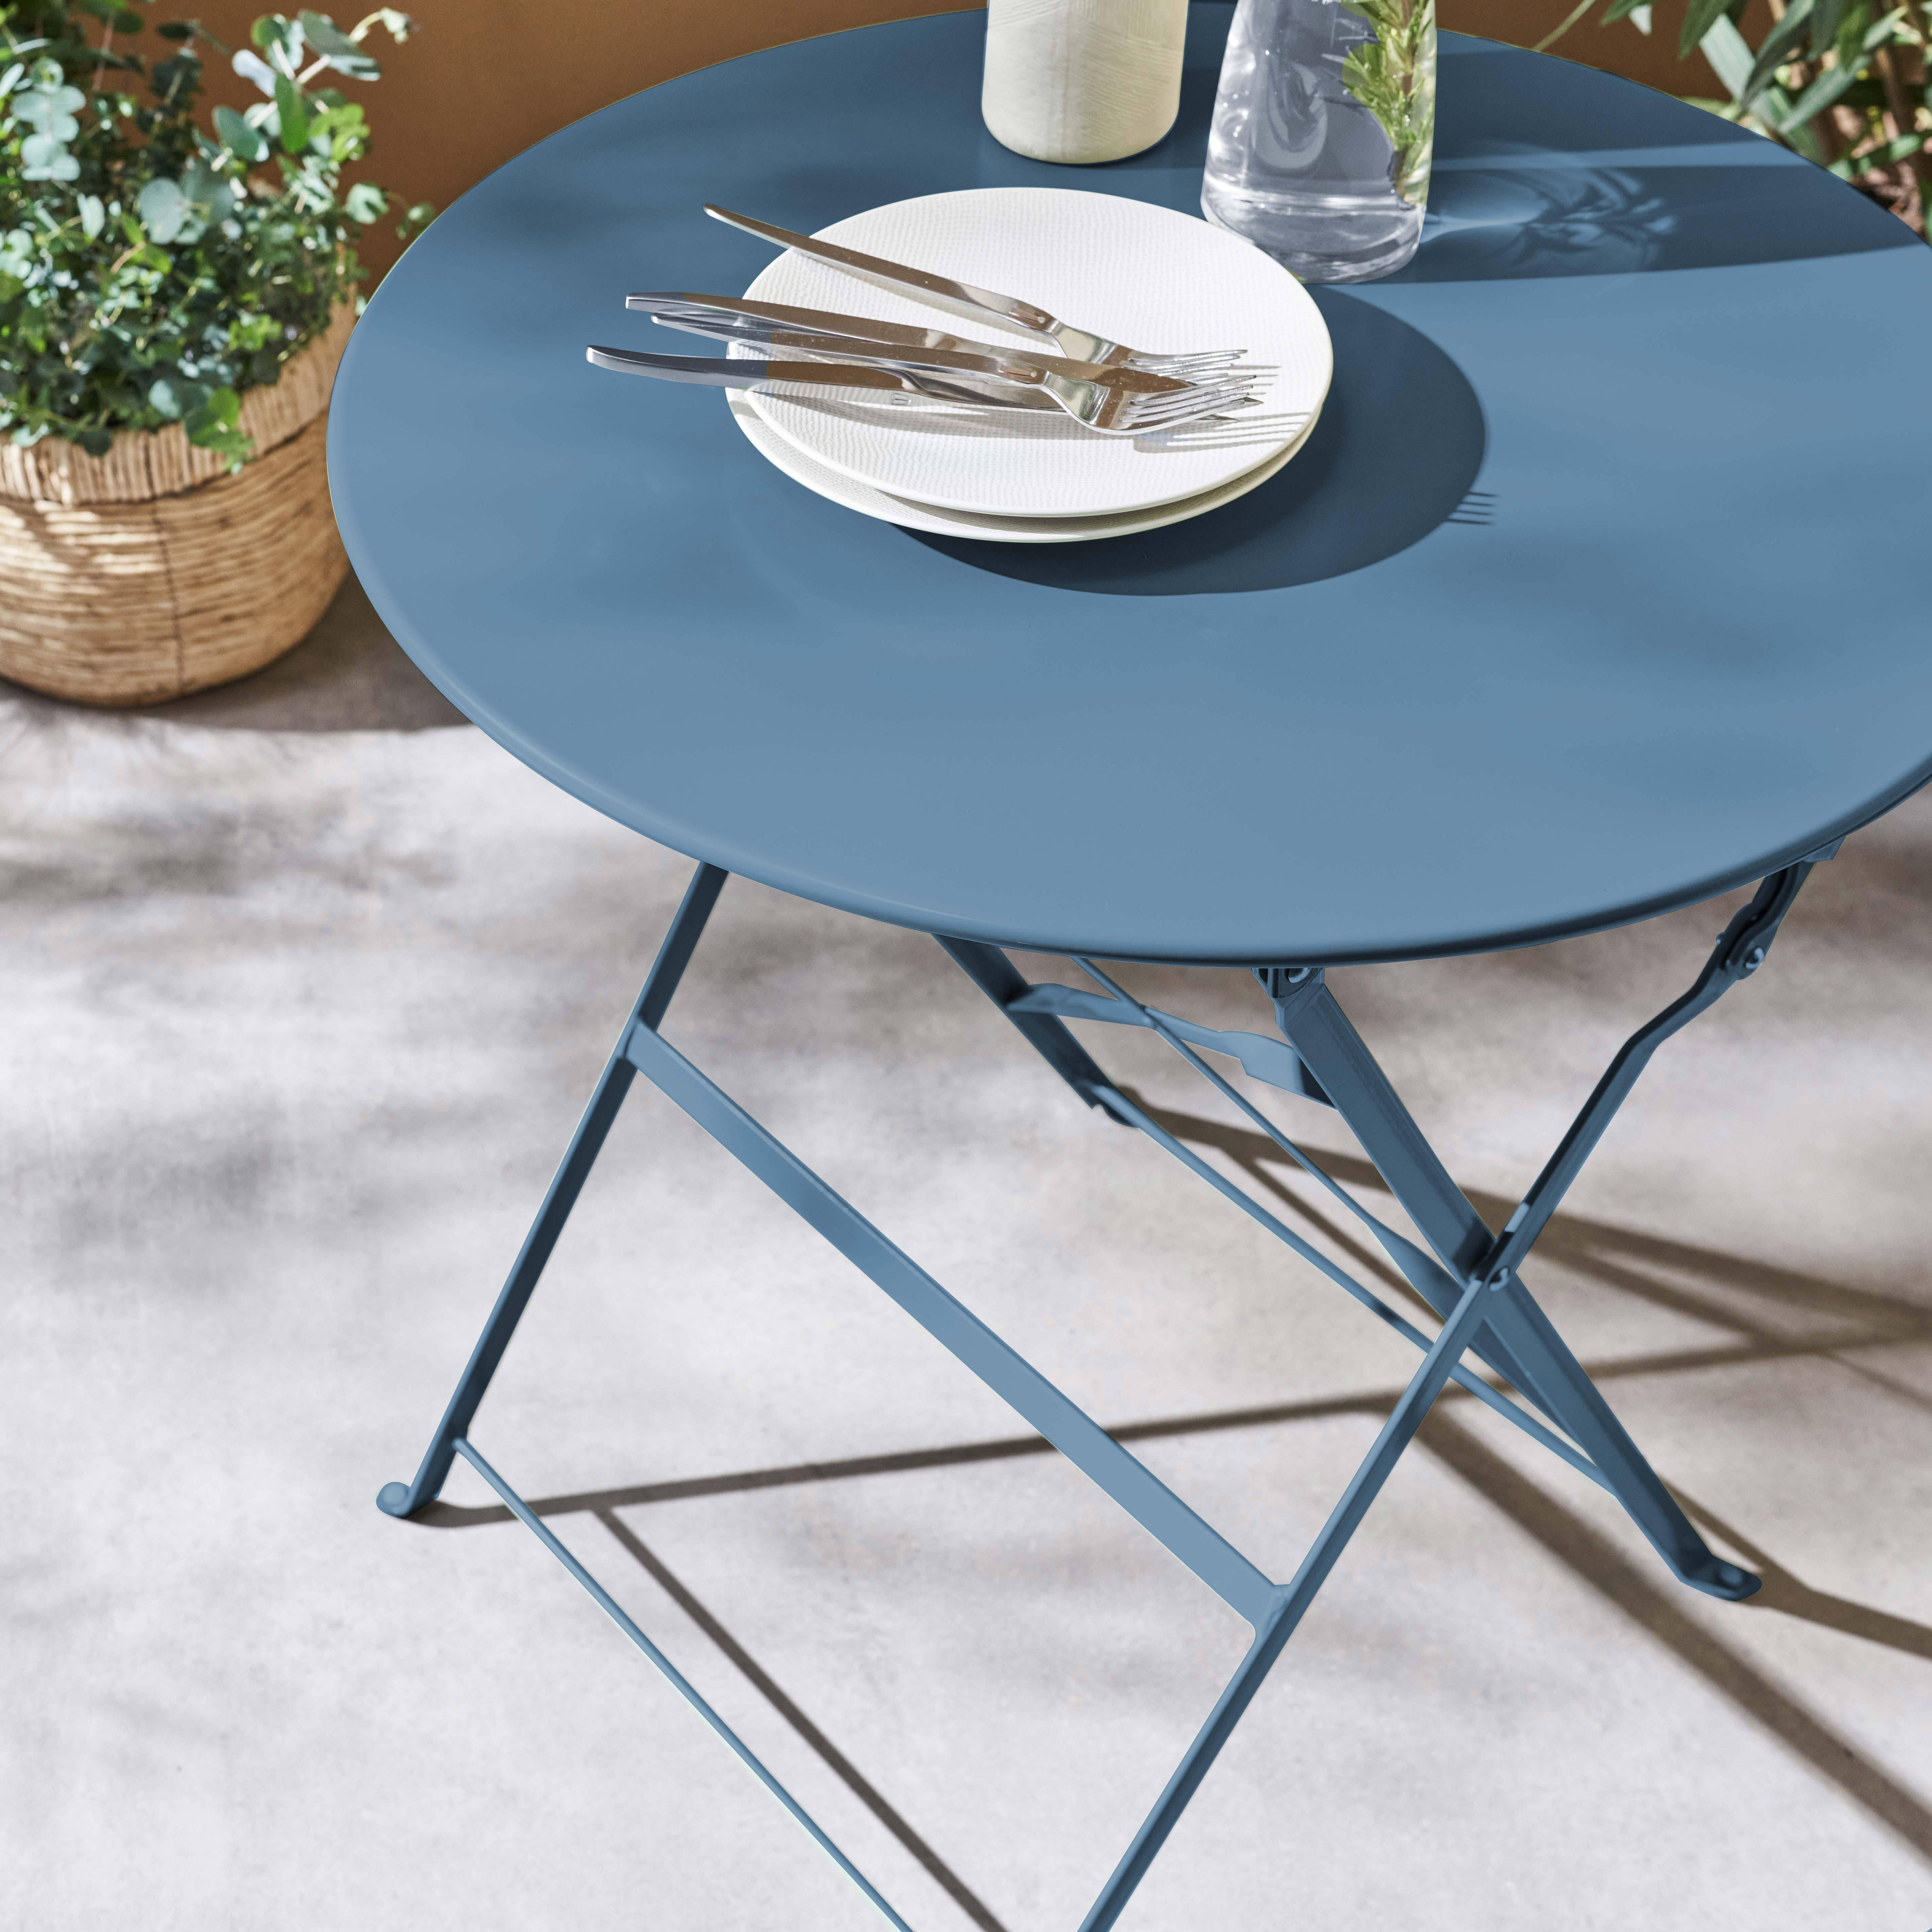 Foldable bistro garden table - Round Emilia grey blue - Round table Ø60cm, thermo-lacquered steel,sweeek,Photo2